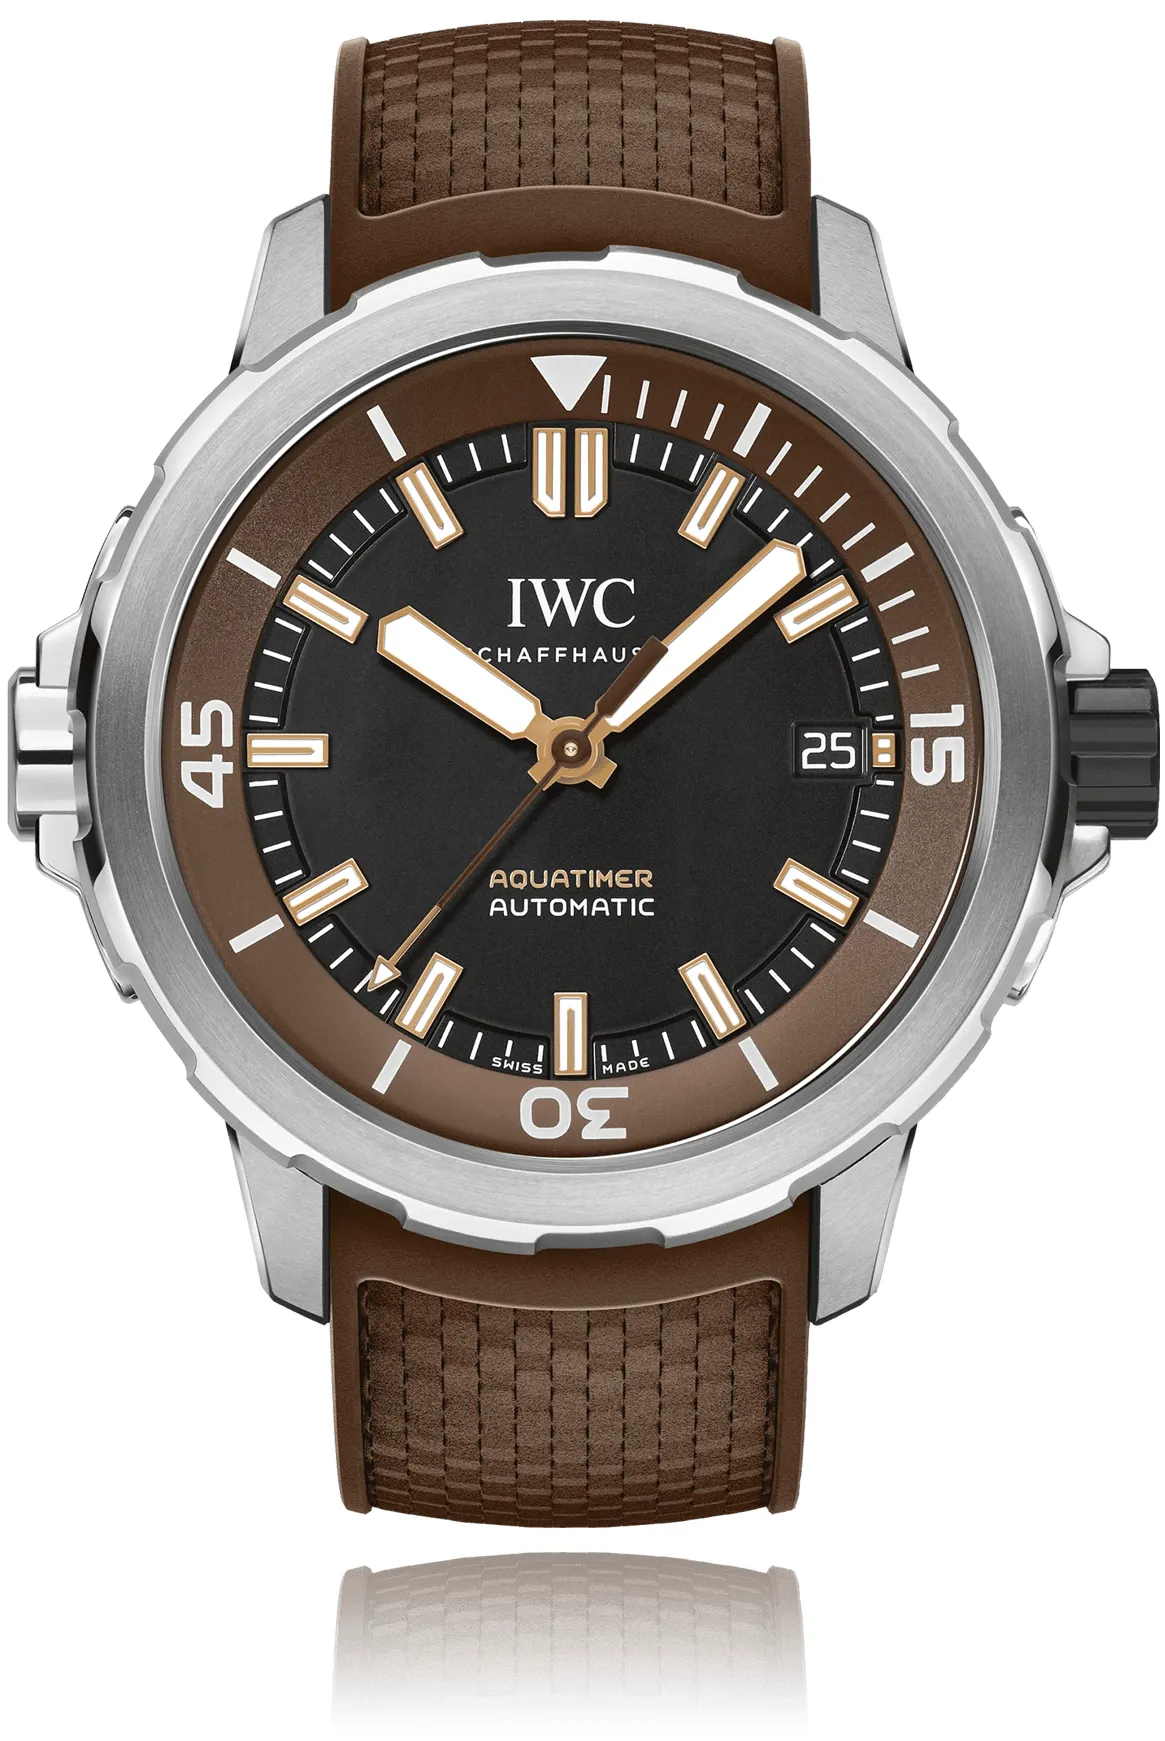 IWC Aquatimer Automatic IW341002 42mm Stainless steel